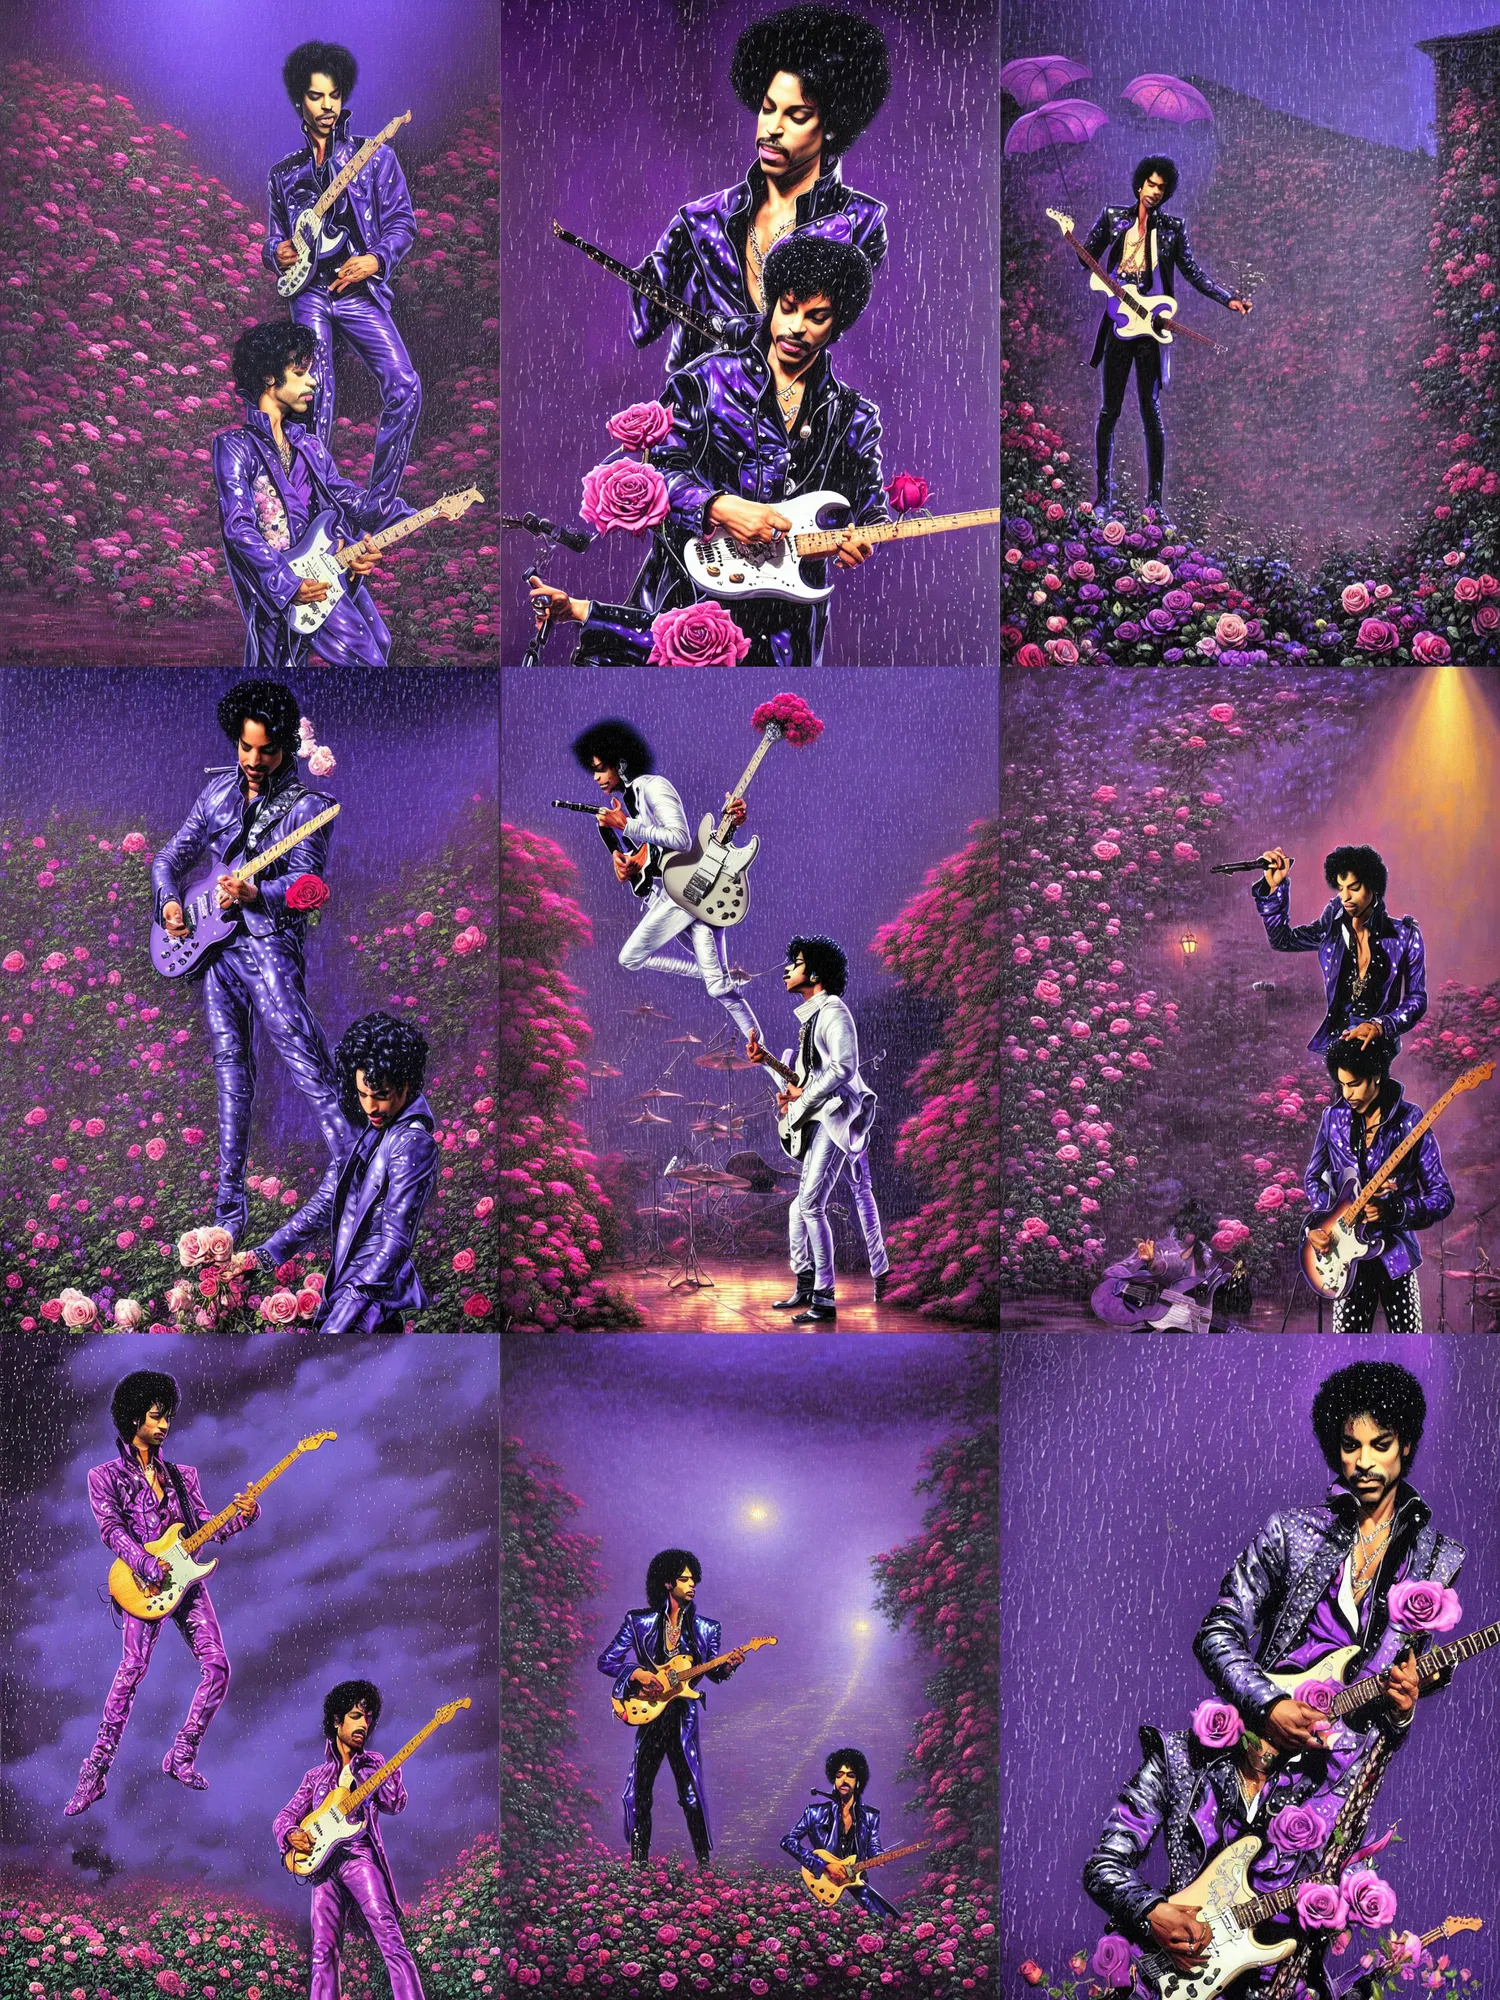 Prompt: prince playing purple rain to a very large audience in the rain, photorealistic painting by james jean and jean giraud and thomas kinkade, low light, beautiful atmosphere, very rainy, some roses and floral decoration on stage, ornamental